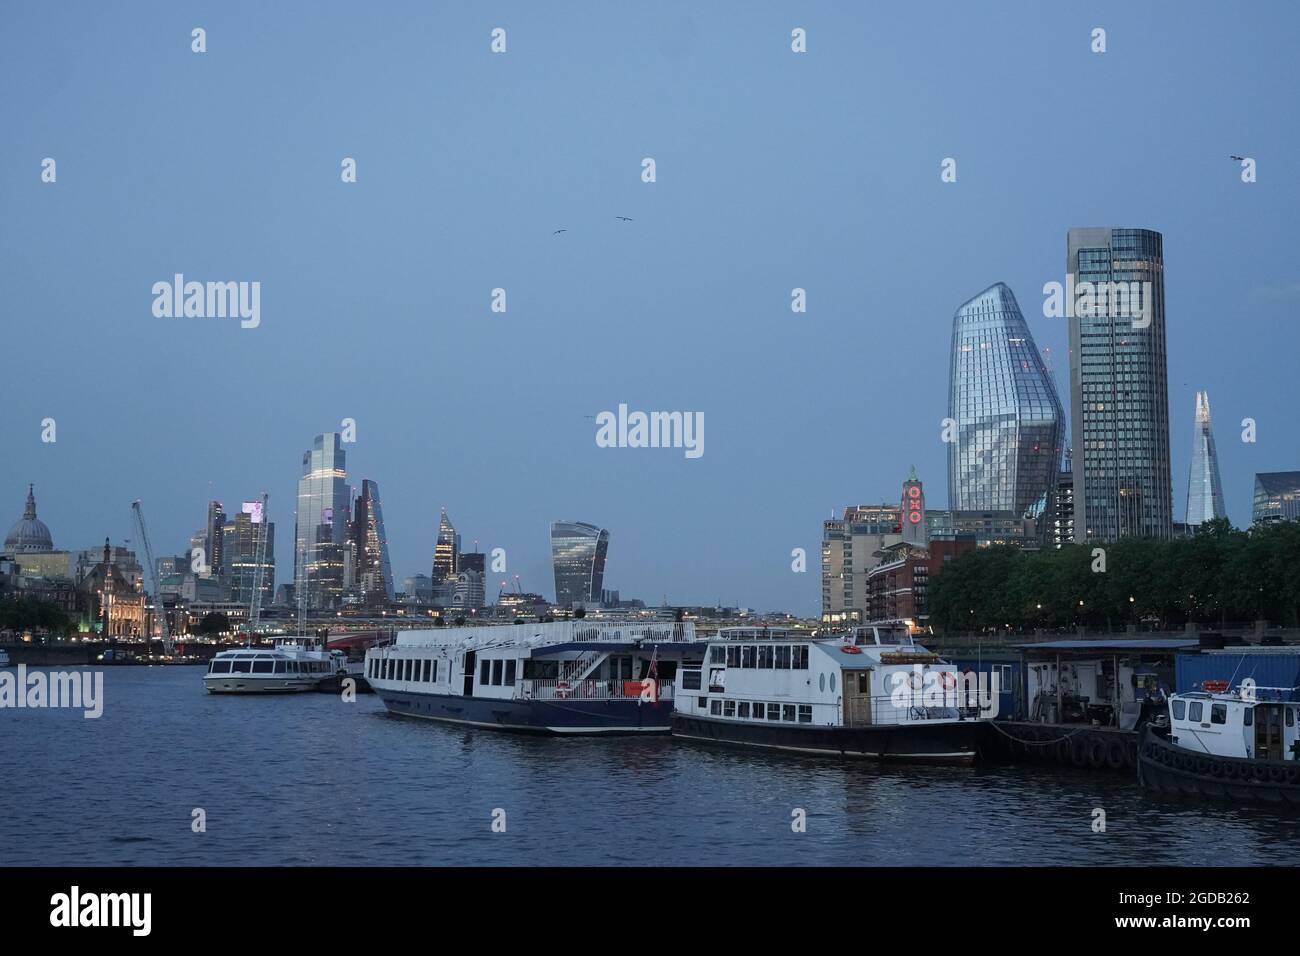 Views of the London skyline, taken from a boat on the river Thames during an evening cruise. Photo date: Friday, August 6, 2021. Photo: Richard Gray/A Stock Photo